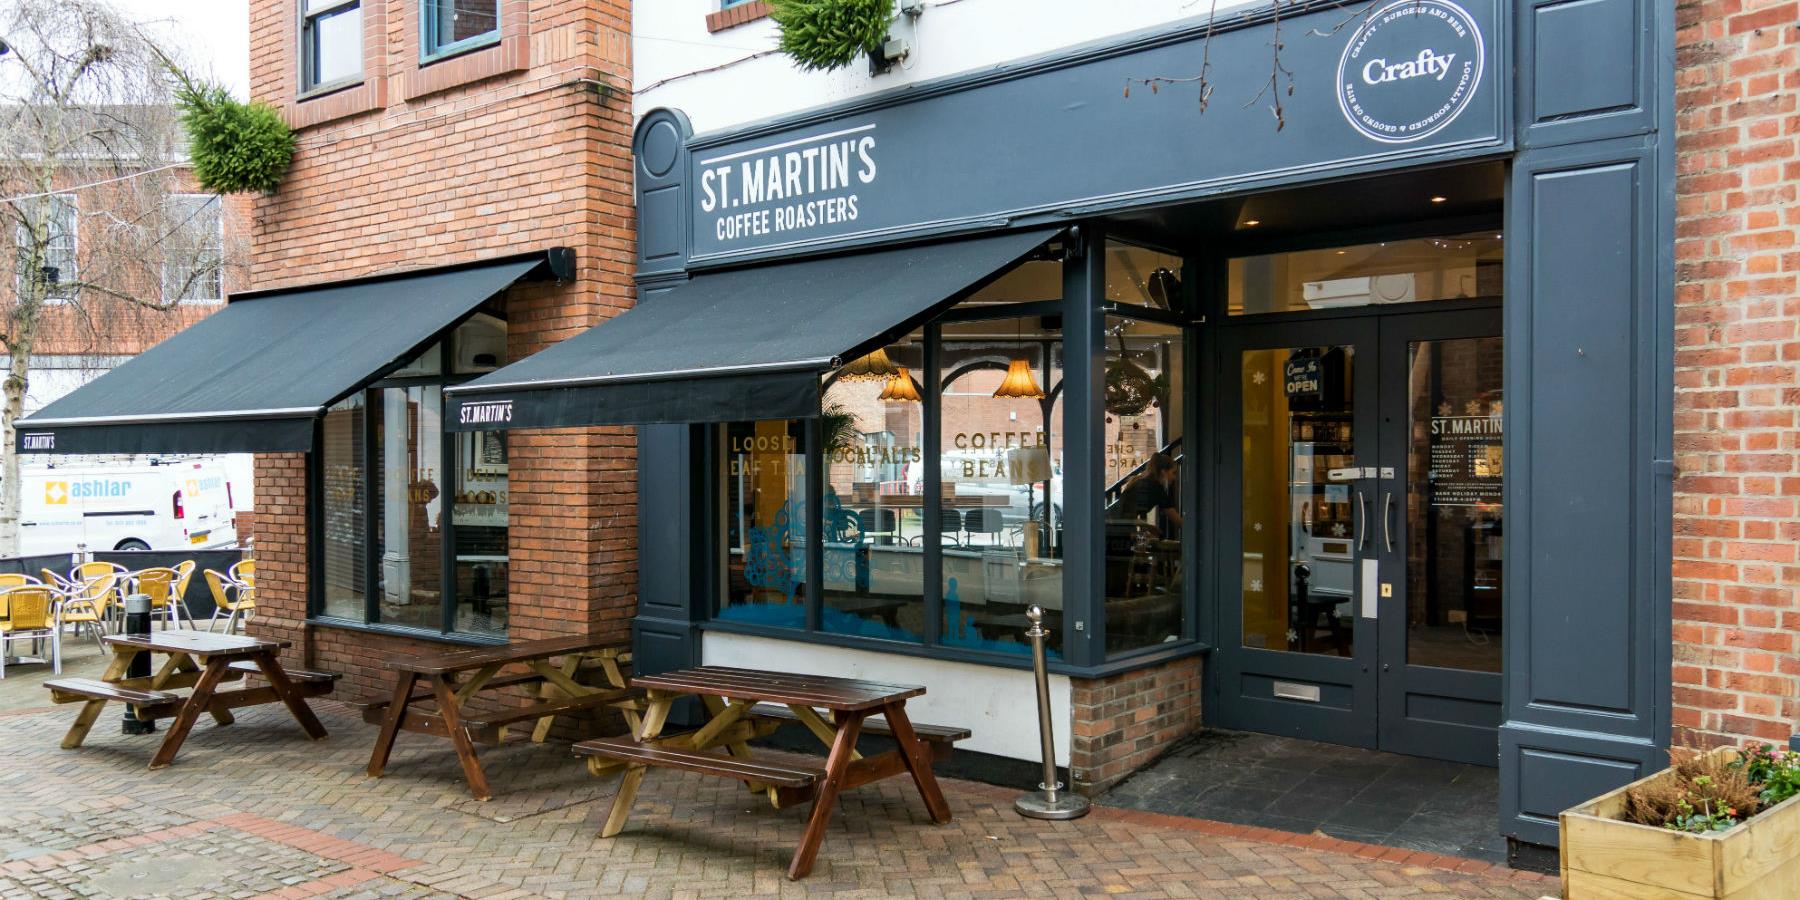 St Martins Coffee, cafe - Restaurants in Leicester